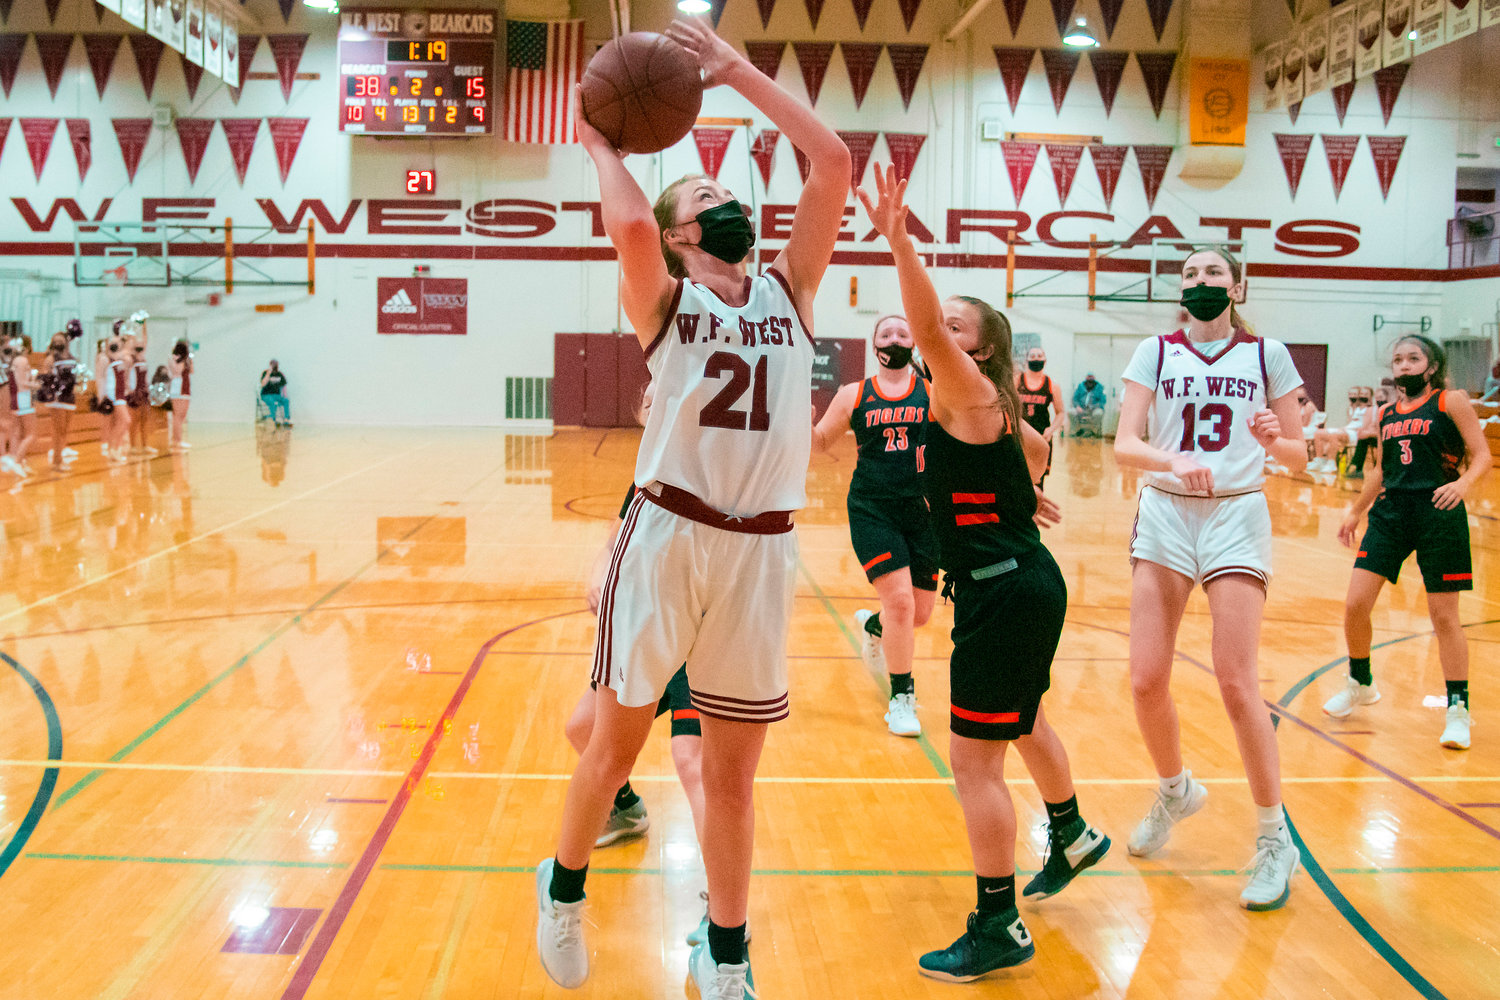 W.F. West’s Morgan Rogerson (21) goes up with the ball during a game against the Tigers played Monday night in Chehalis.